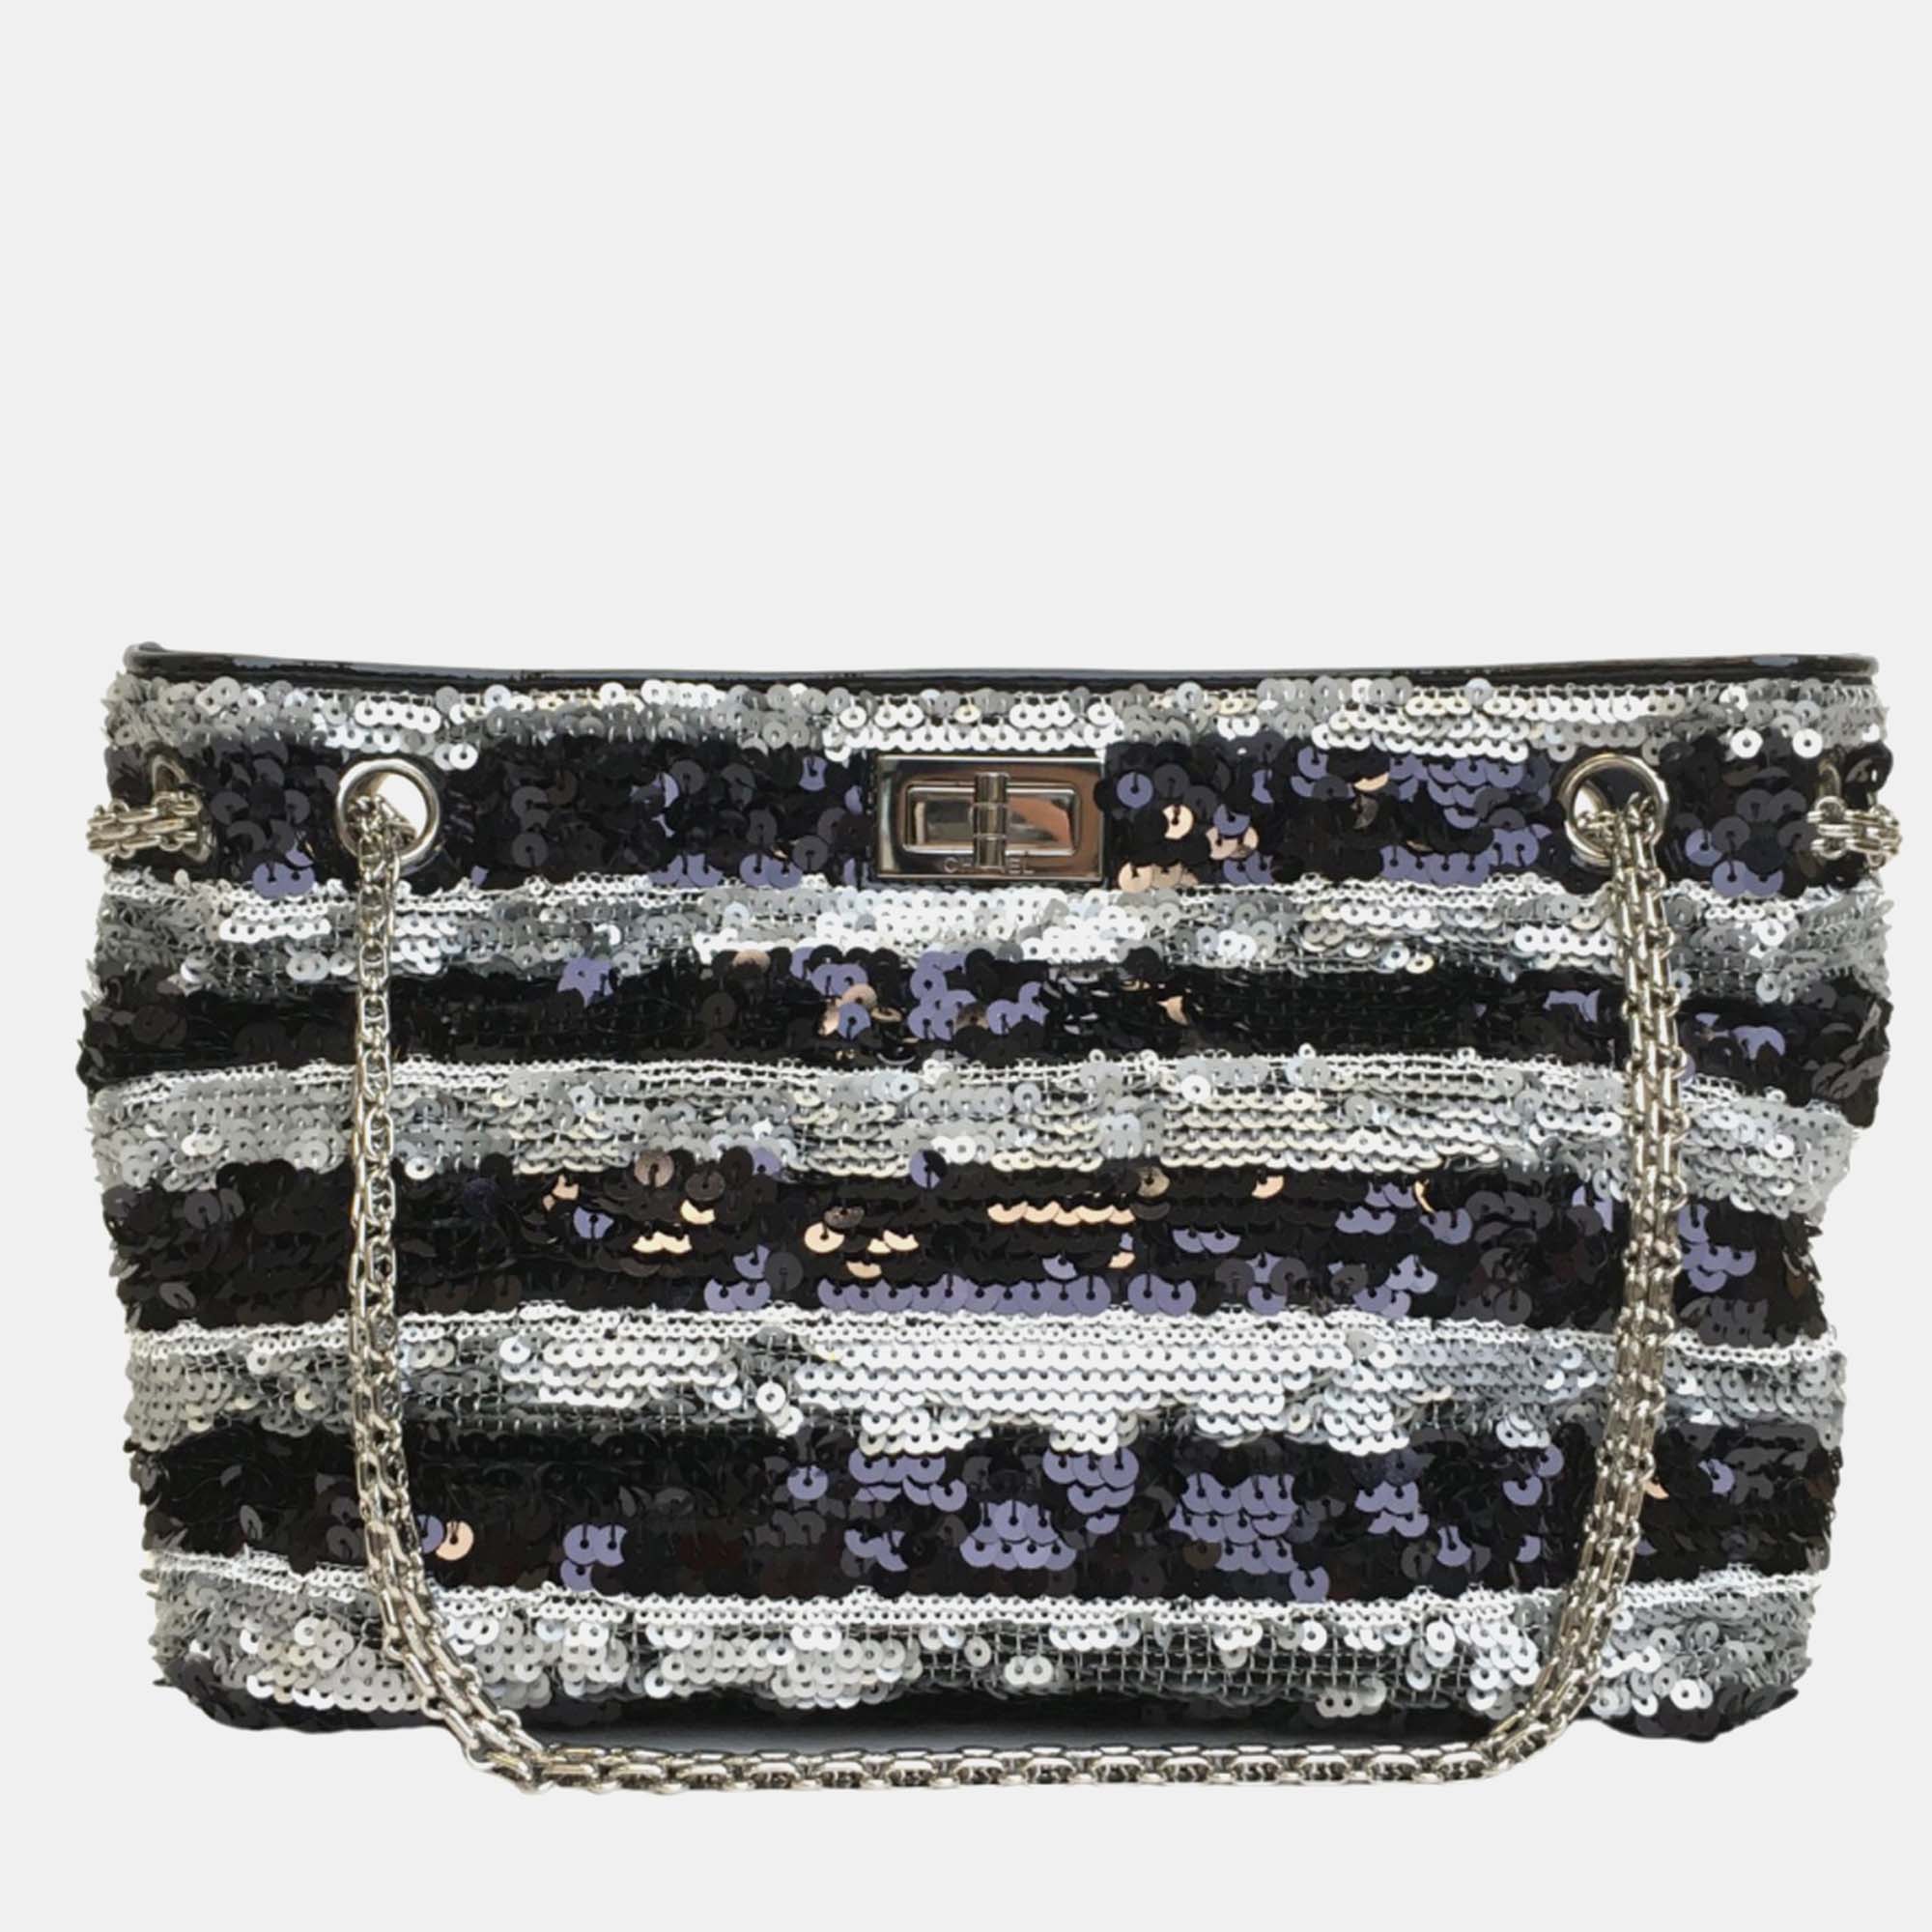 Crafted with exquisite precision this timeless Chanel clutch combines luxury with practicality ensuring you make a chic statement at every soirée.